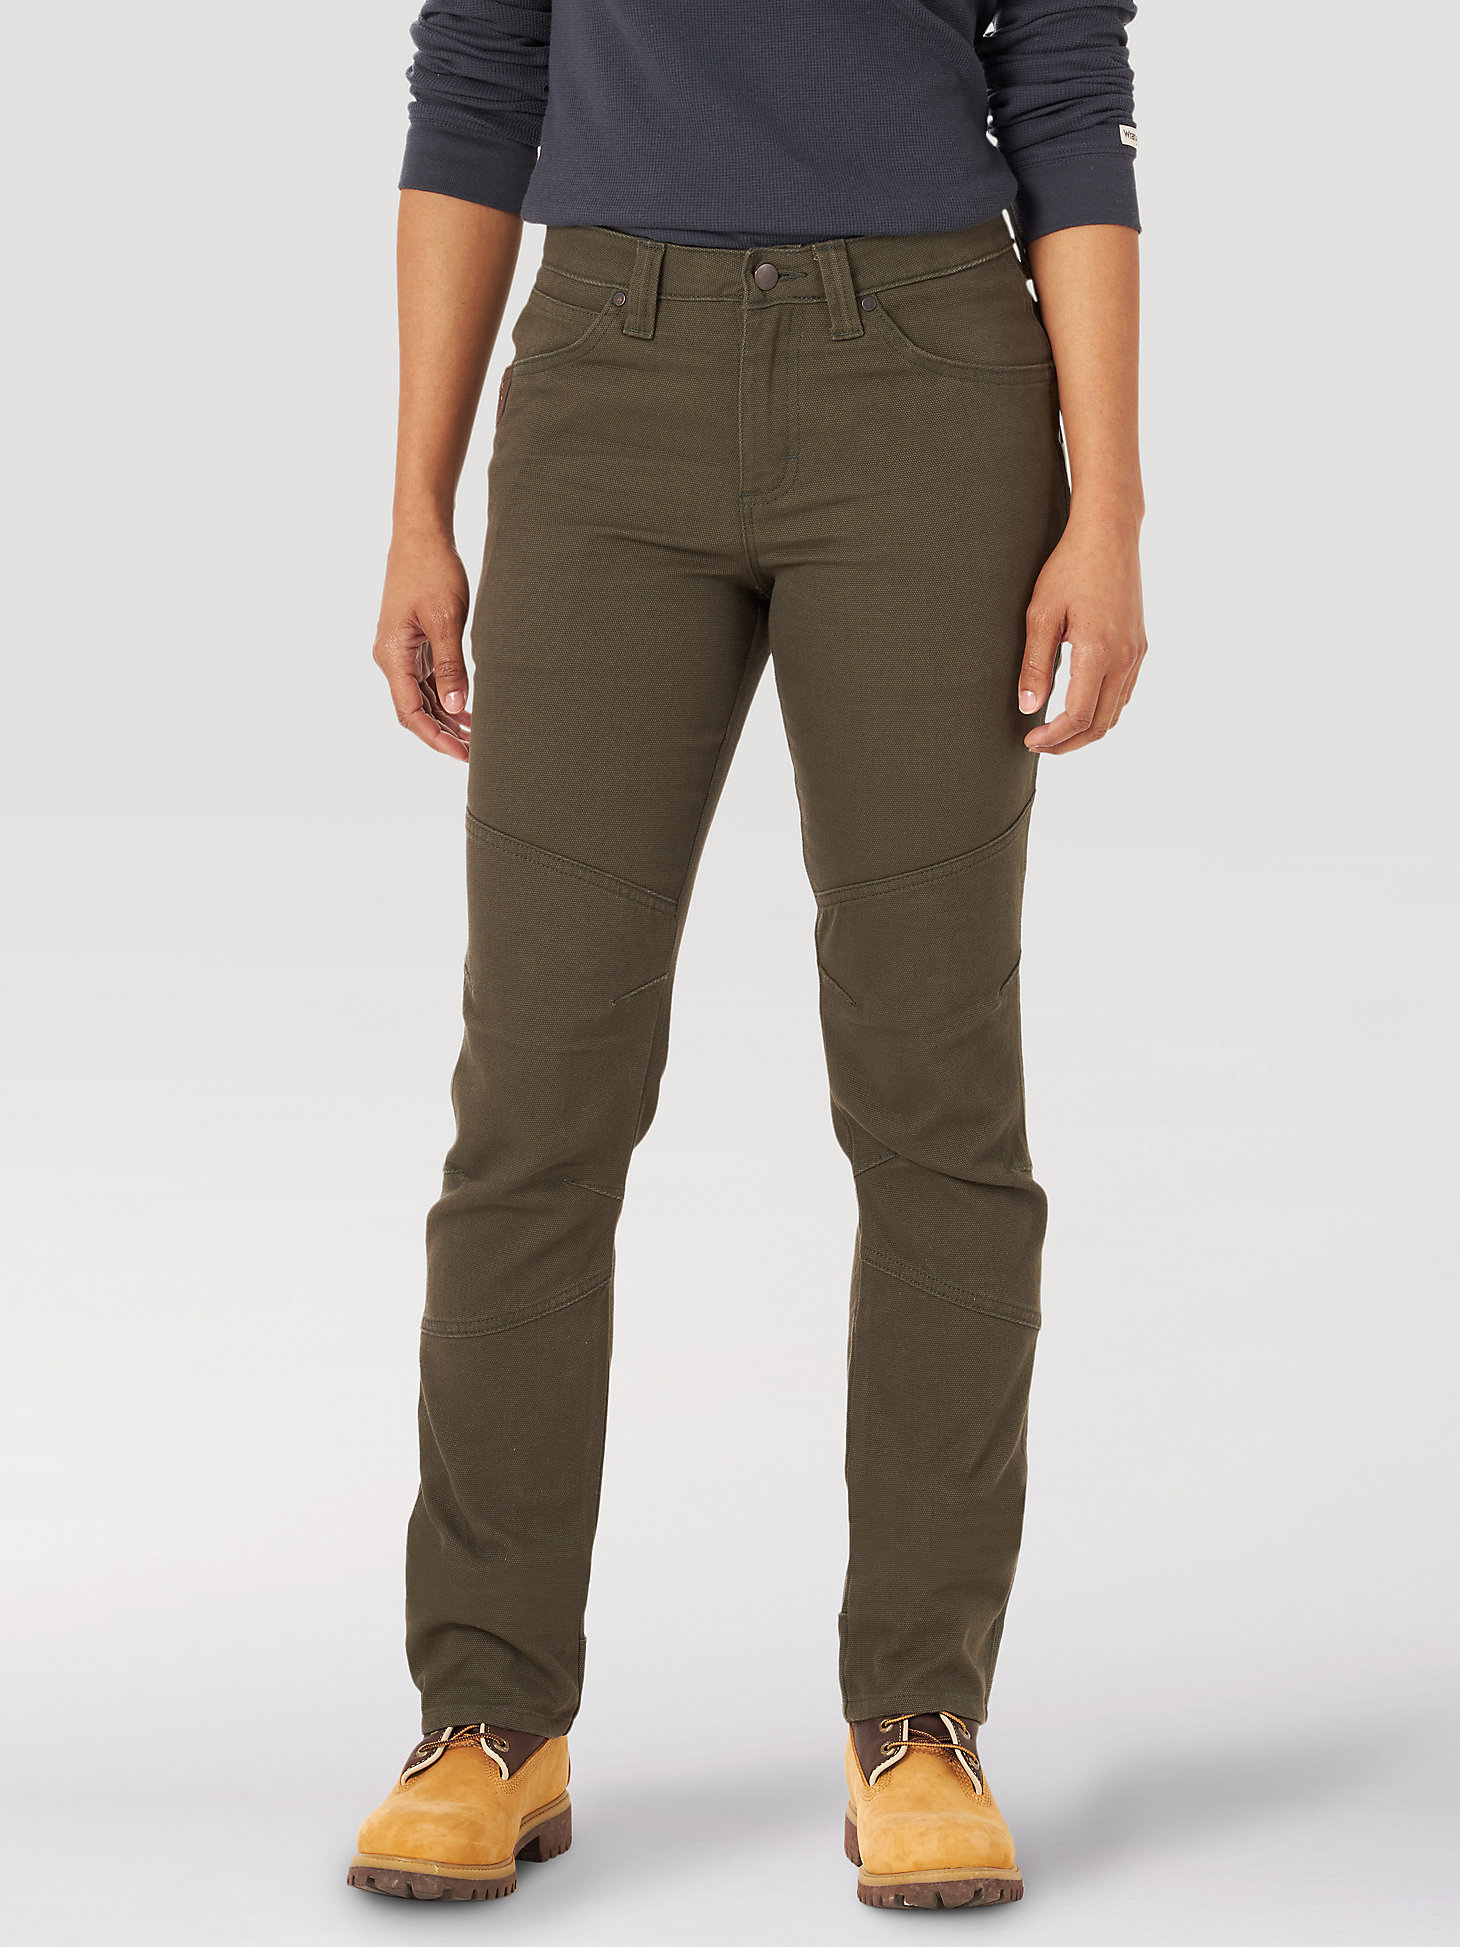 Women's Wrangler® RIGGS Workwear® Straight Fit Utility Work Pant in Loden main view